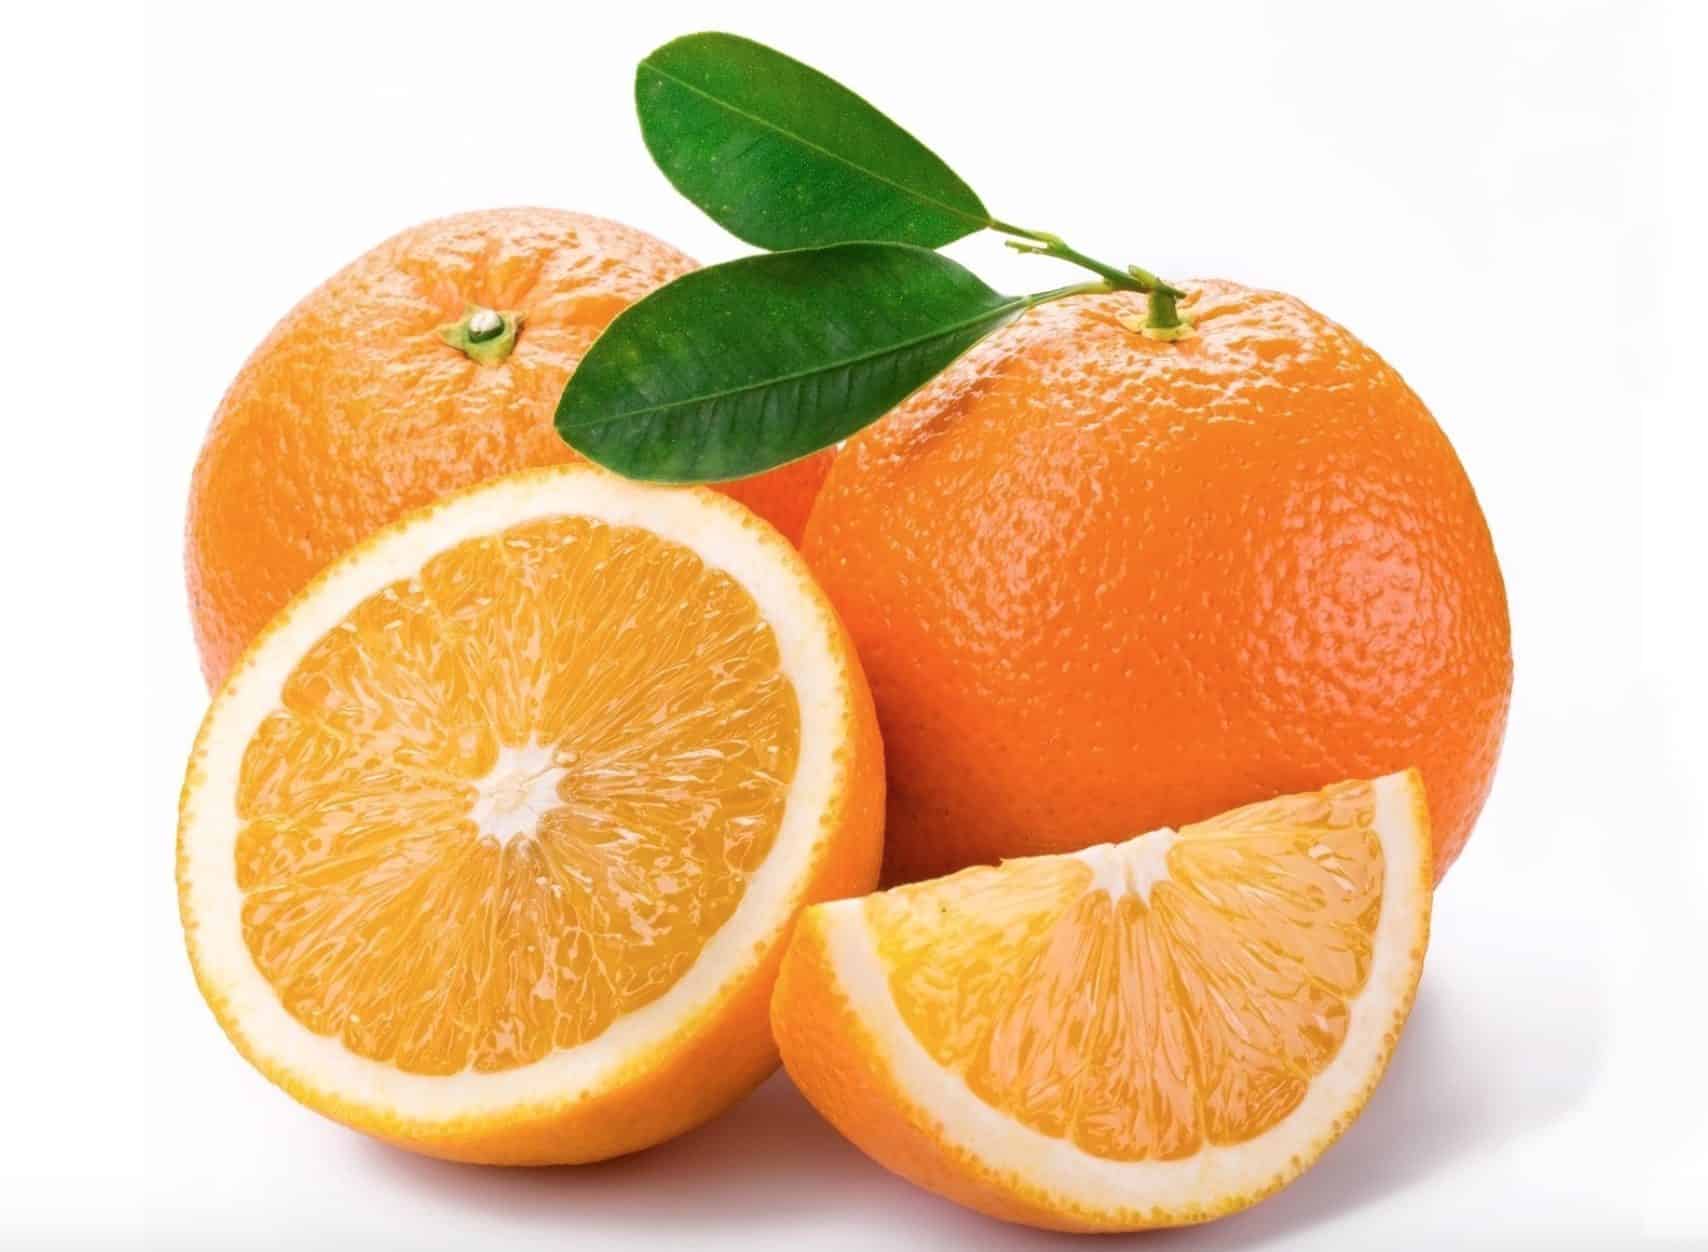 Tips and recommendations on how dogs can eat oranges.